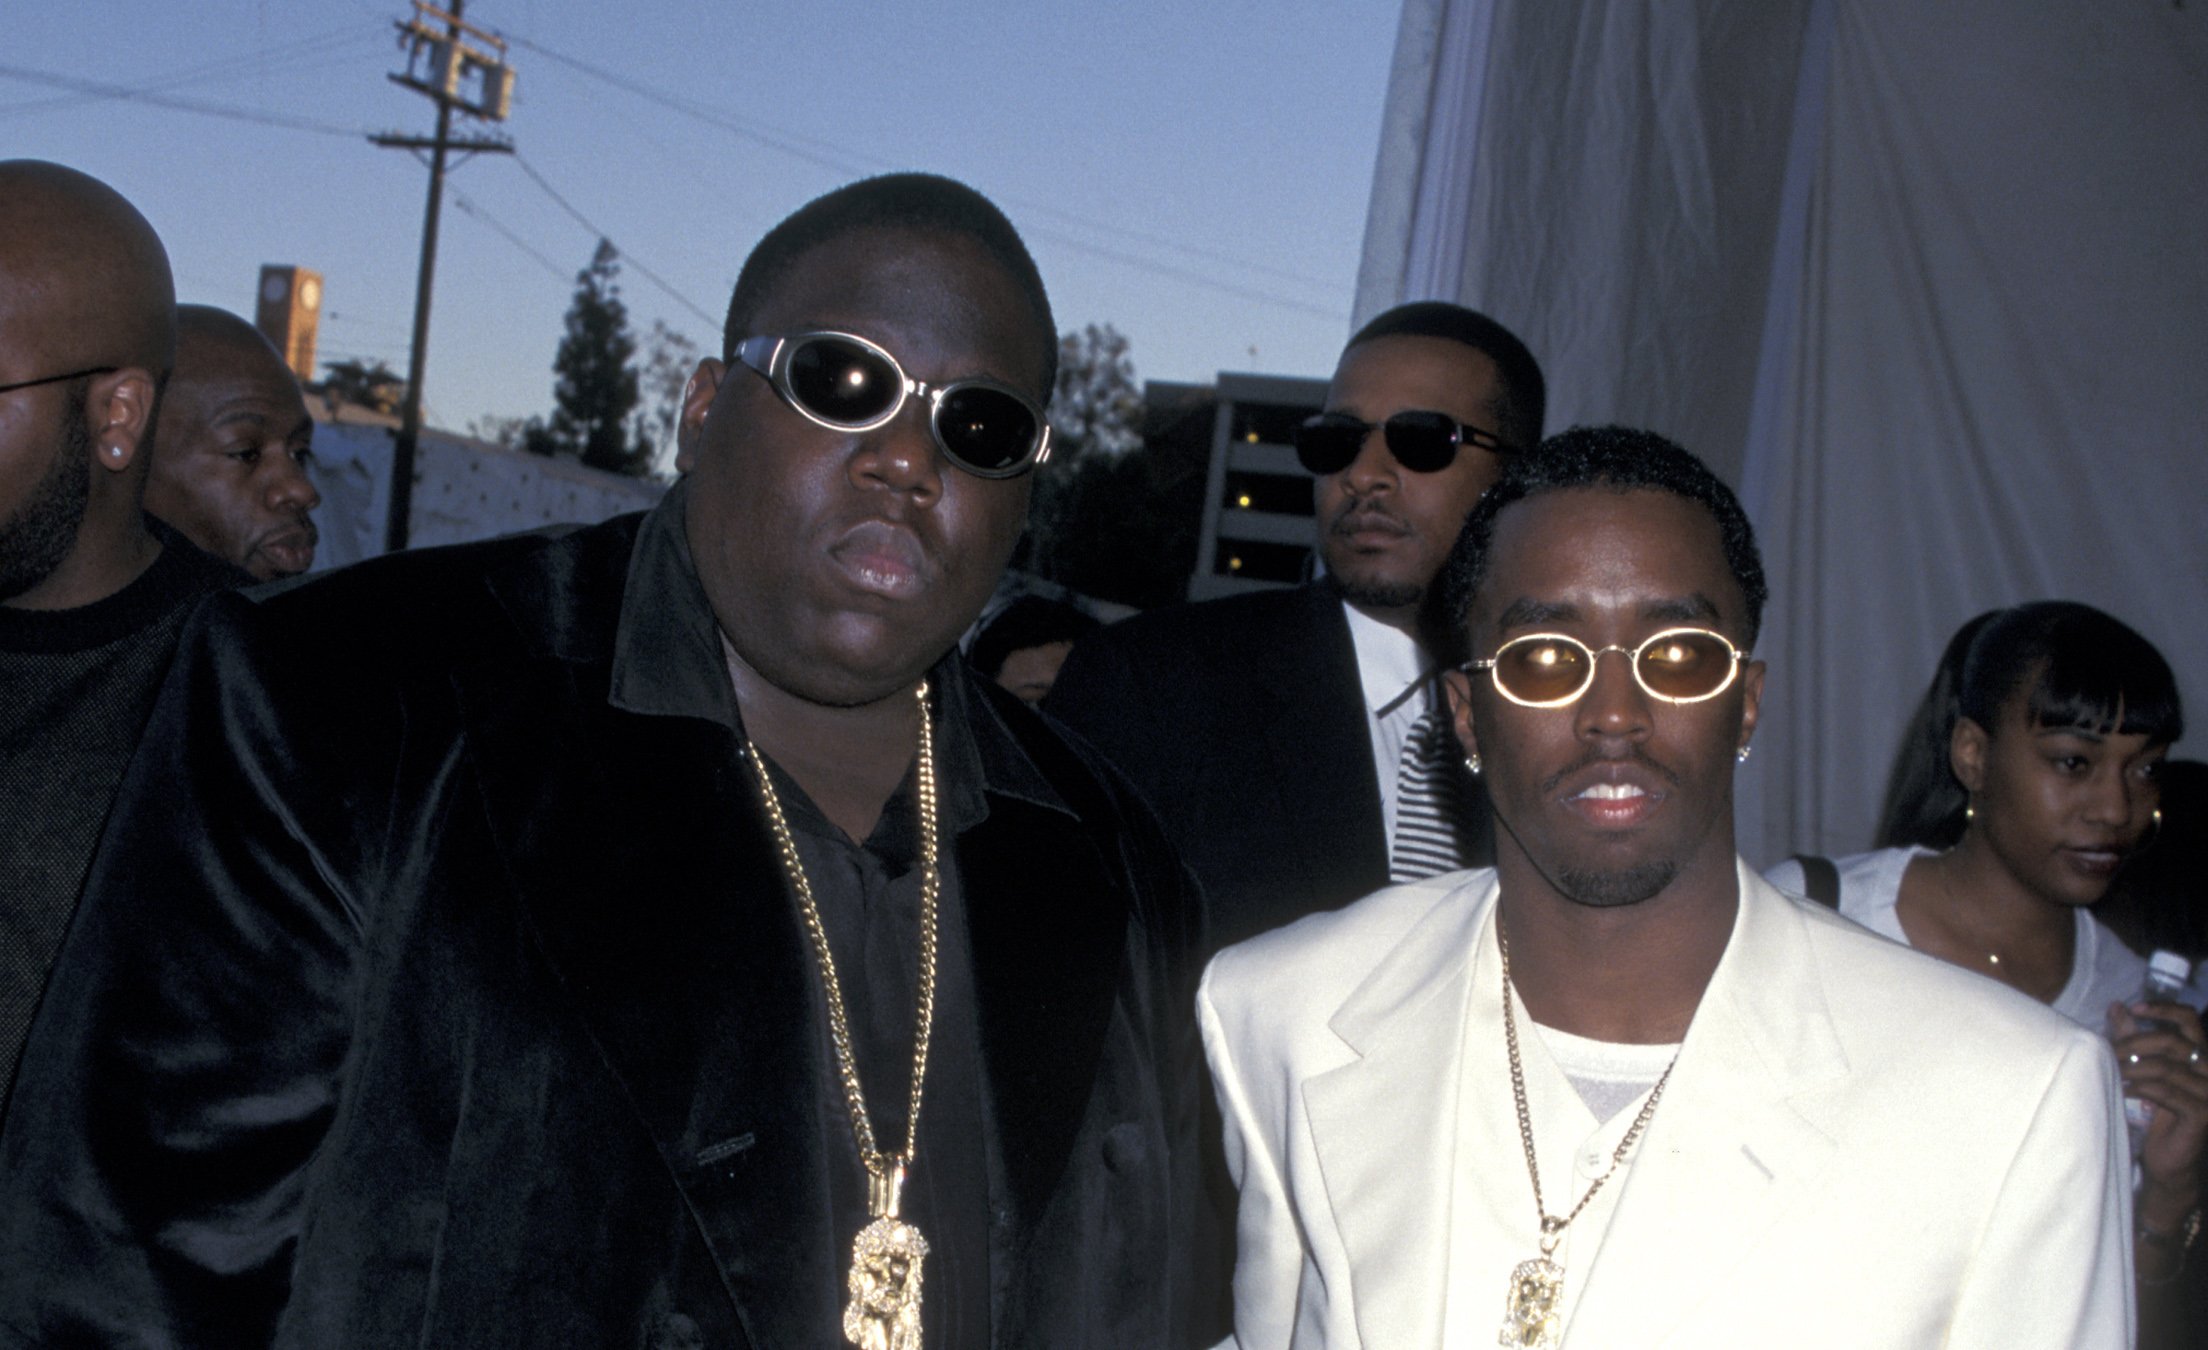 'One More Chance' rapper The Notorious B.I.G. and Sean "P. Diddy" Combs posing for a photo together